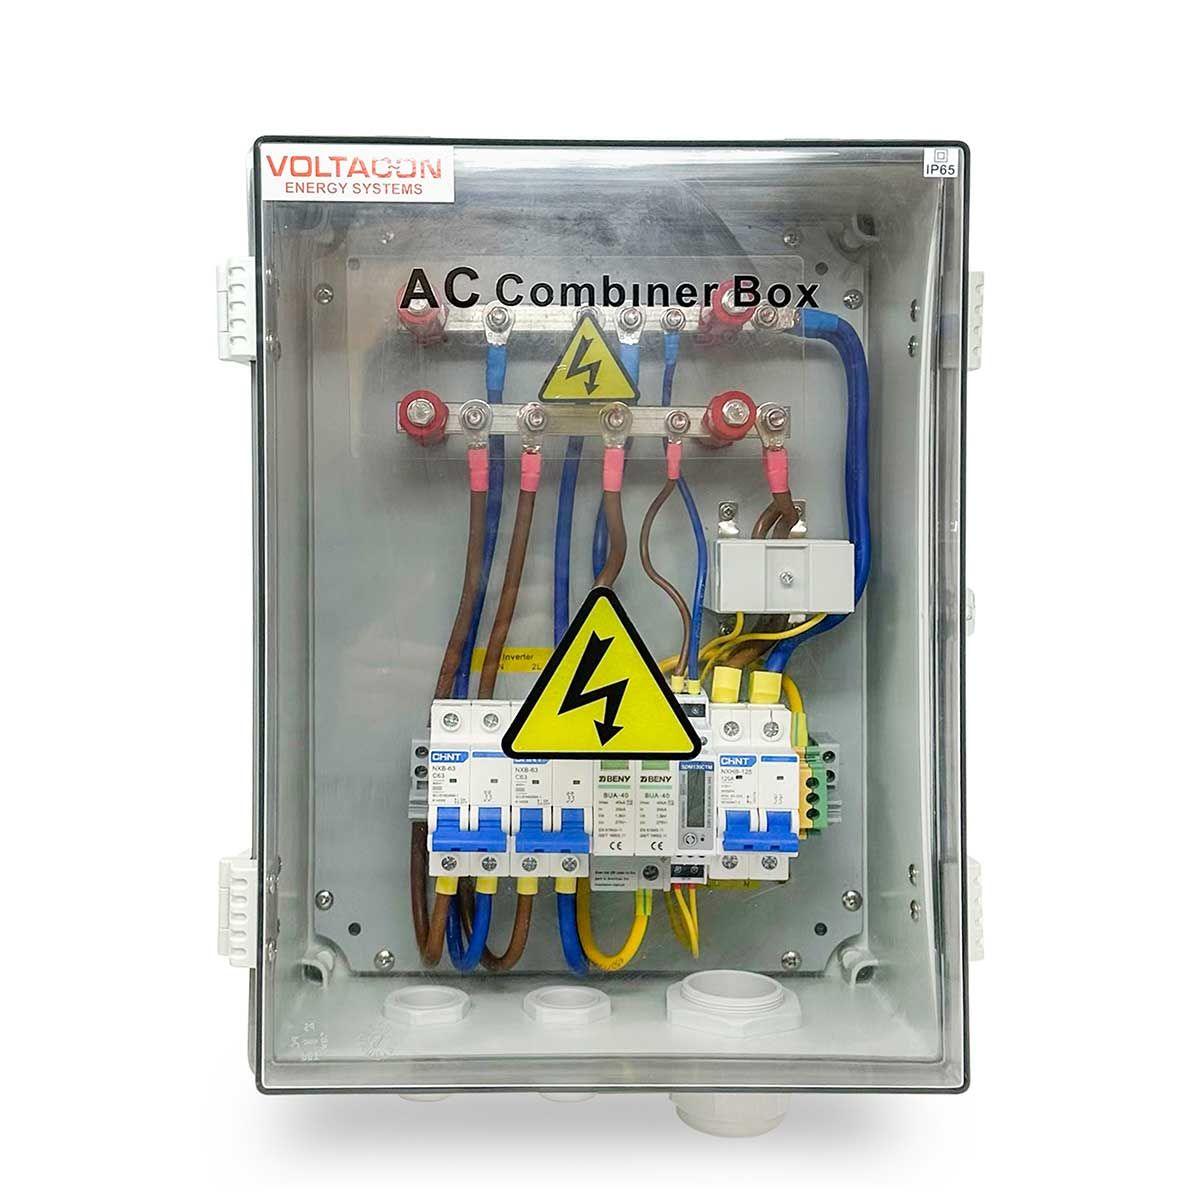 AC Combiner Box 2-ways In, 1-way Output. Twin Solar Inverters In Parallel - VoltaconSolar